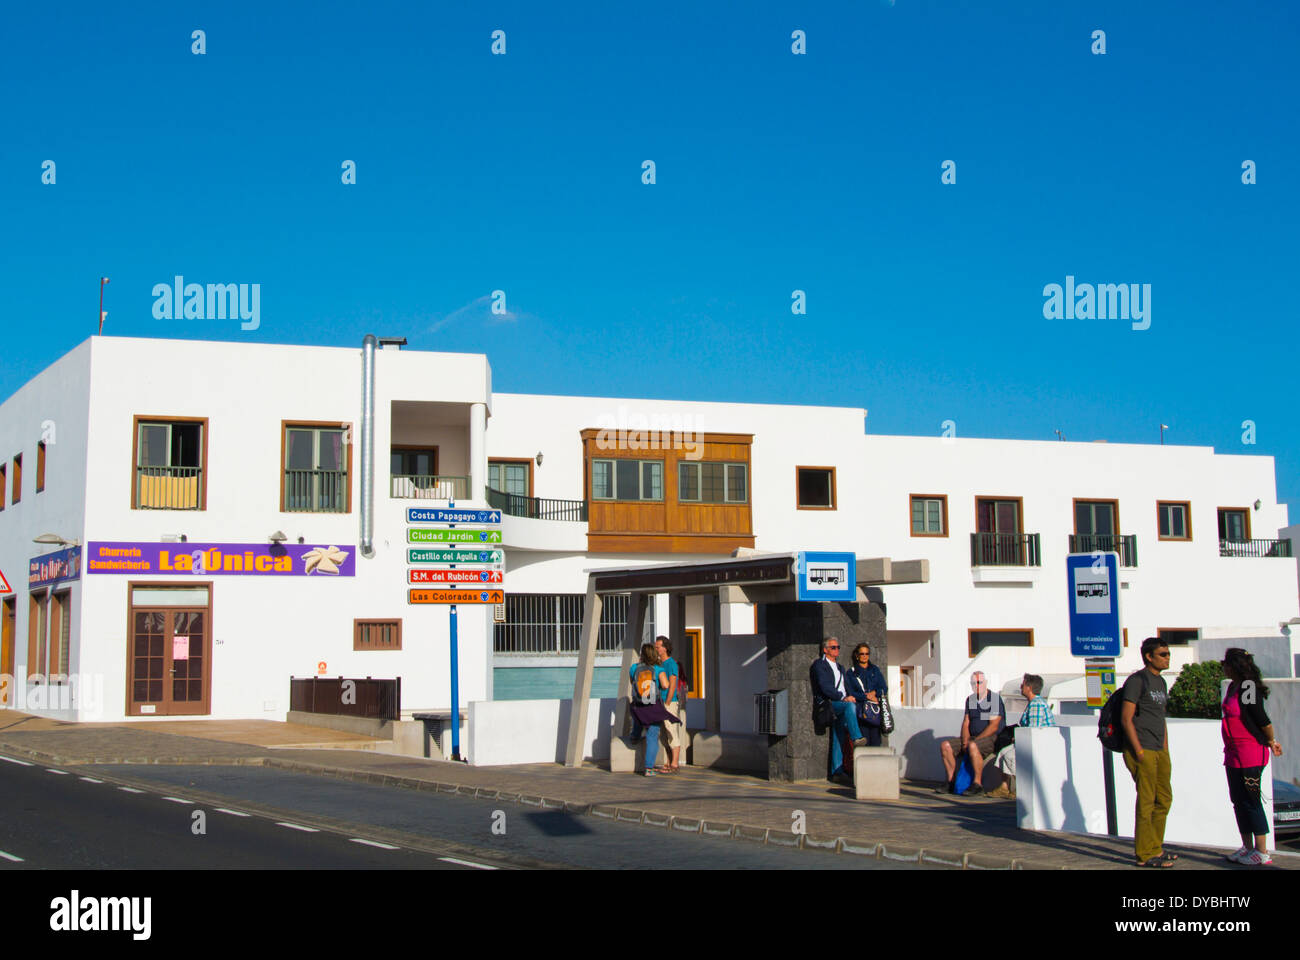 People waiting for bus outside the bus station, Playa Blanca, Lanzarote, Canary Islands, Spain, Europe Stock Photo